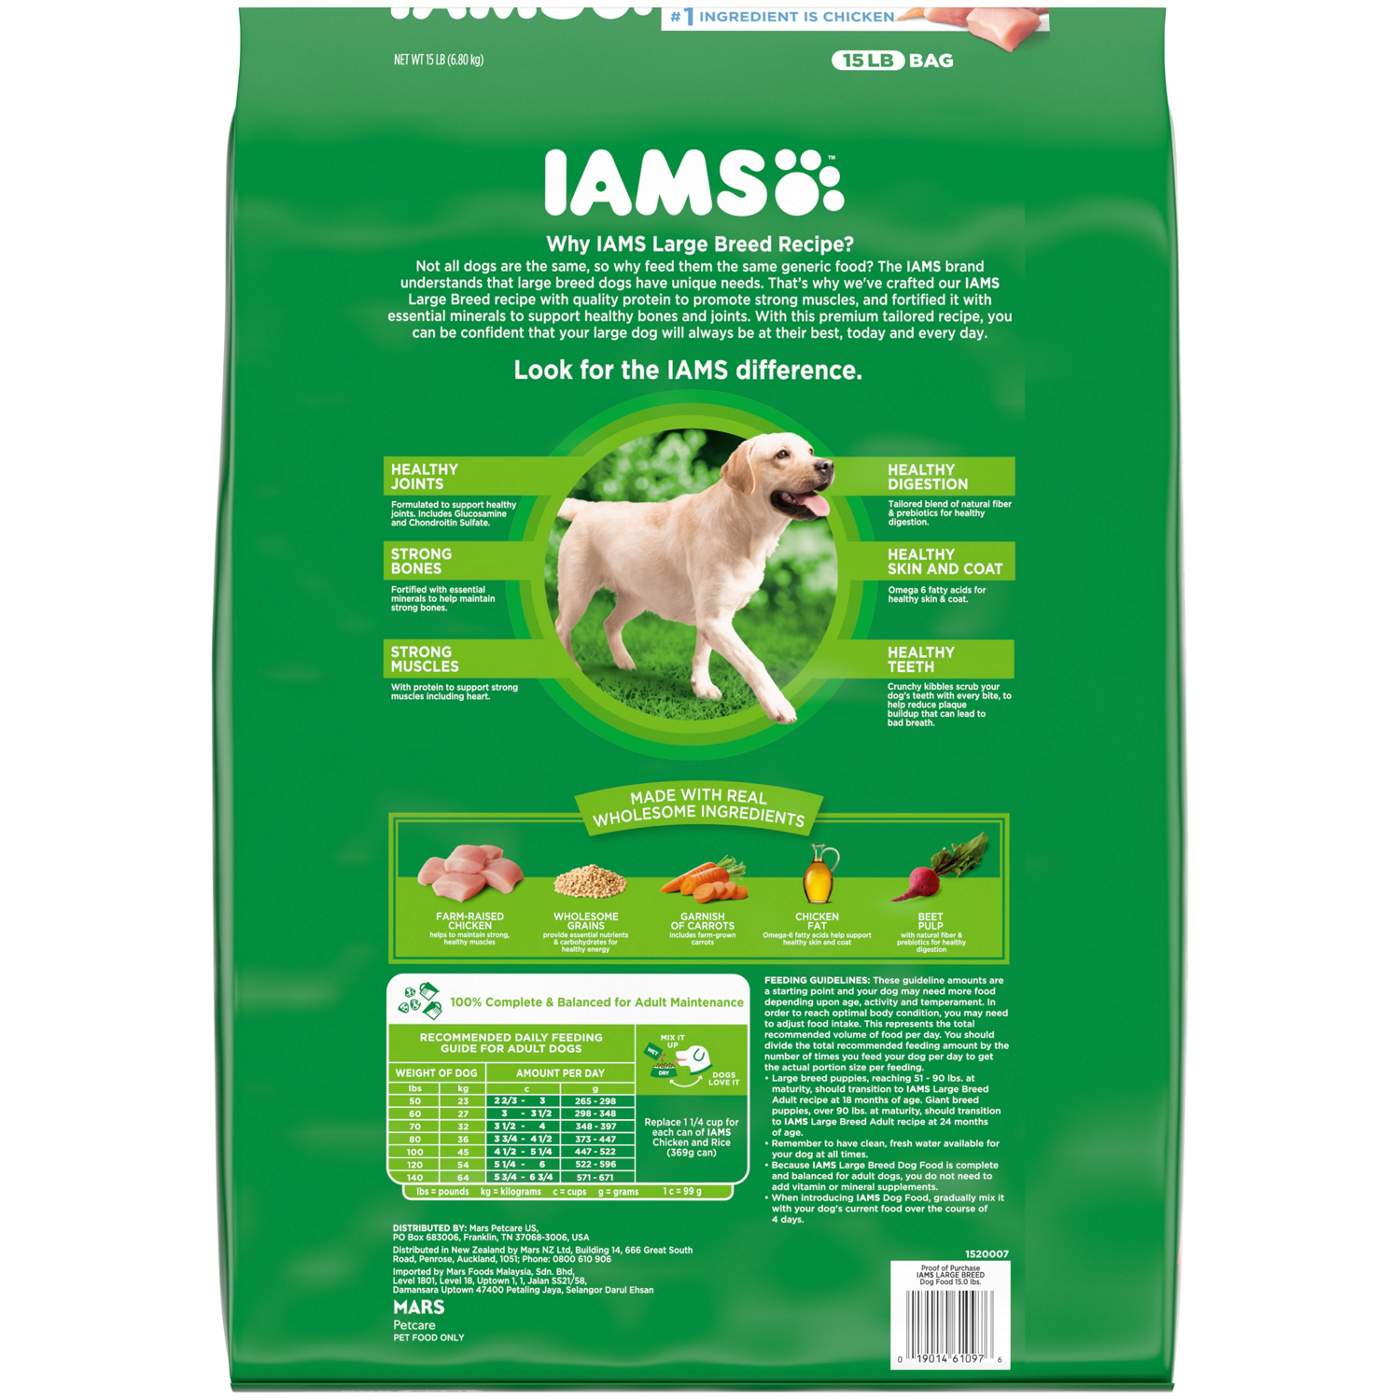 IAMS Adult High Protein Large Breed Dry Dog Food with Real Chicken; image 3 of 5